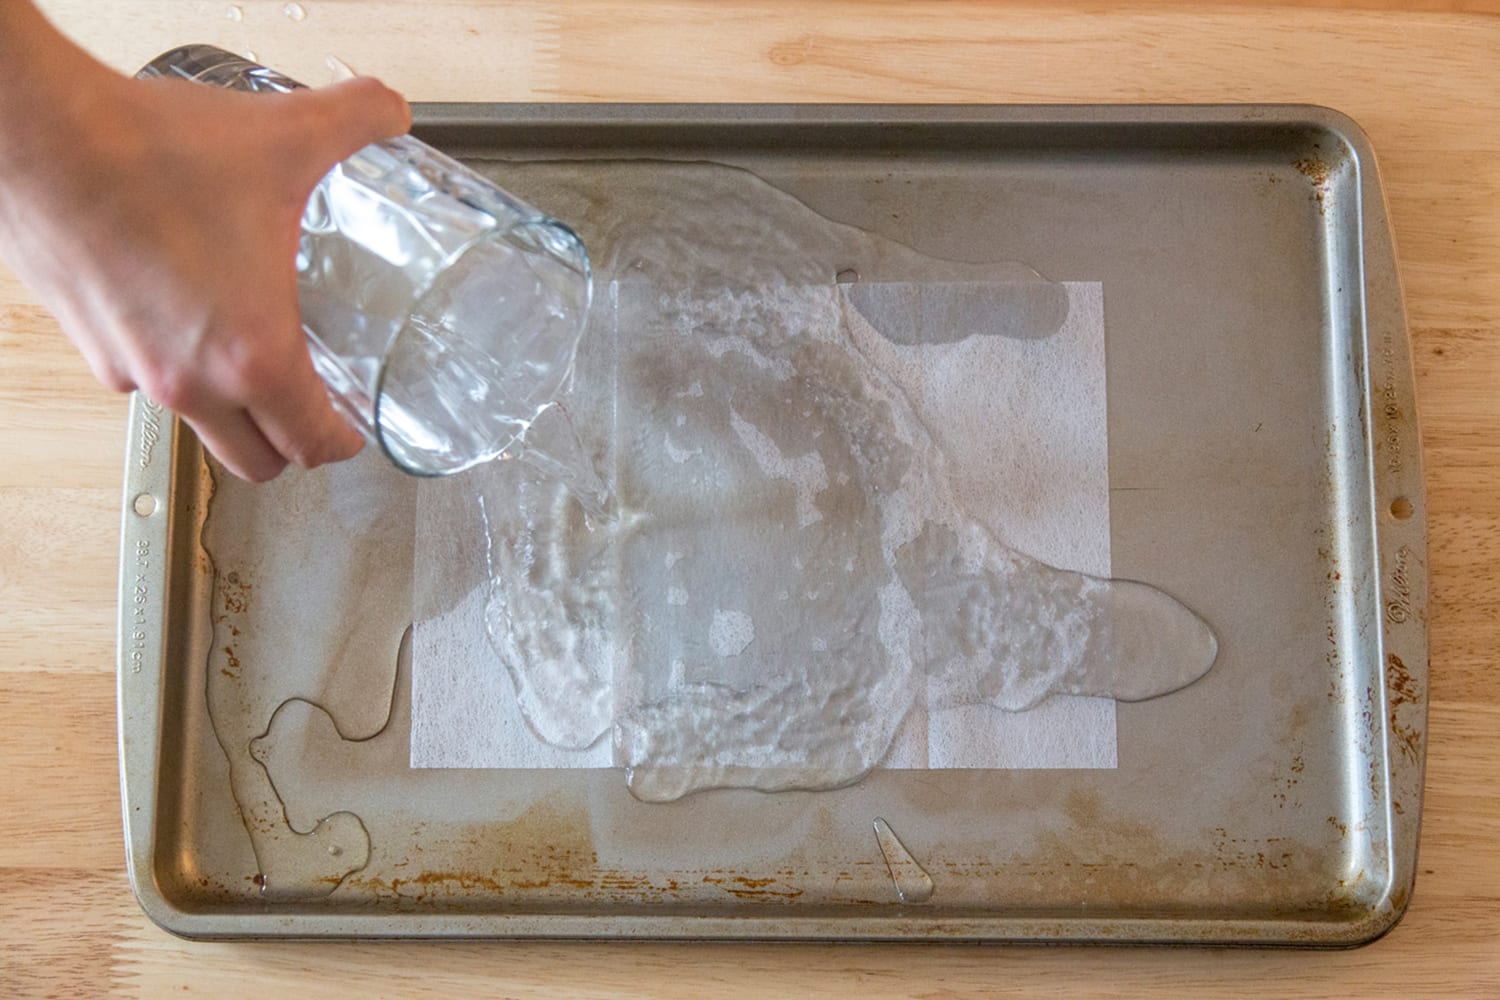 https://media-cldnry.s-nbcnews.com/image/upload/newscms/2015_17/501426/home-hacks-spring-cleaning-today-150420-baking-sheet-02.jpg